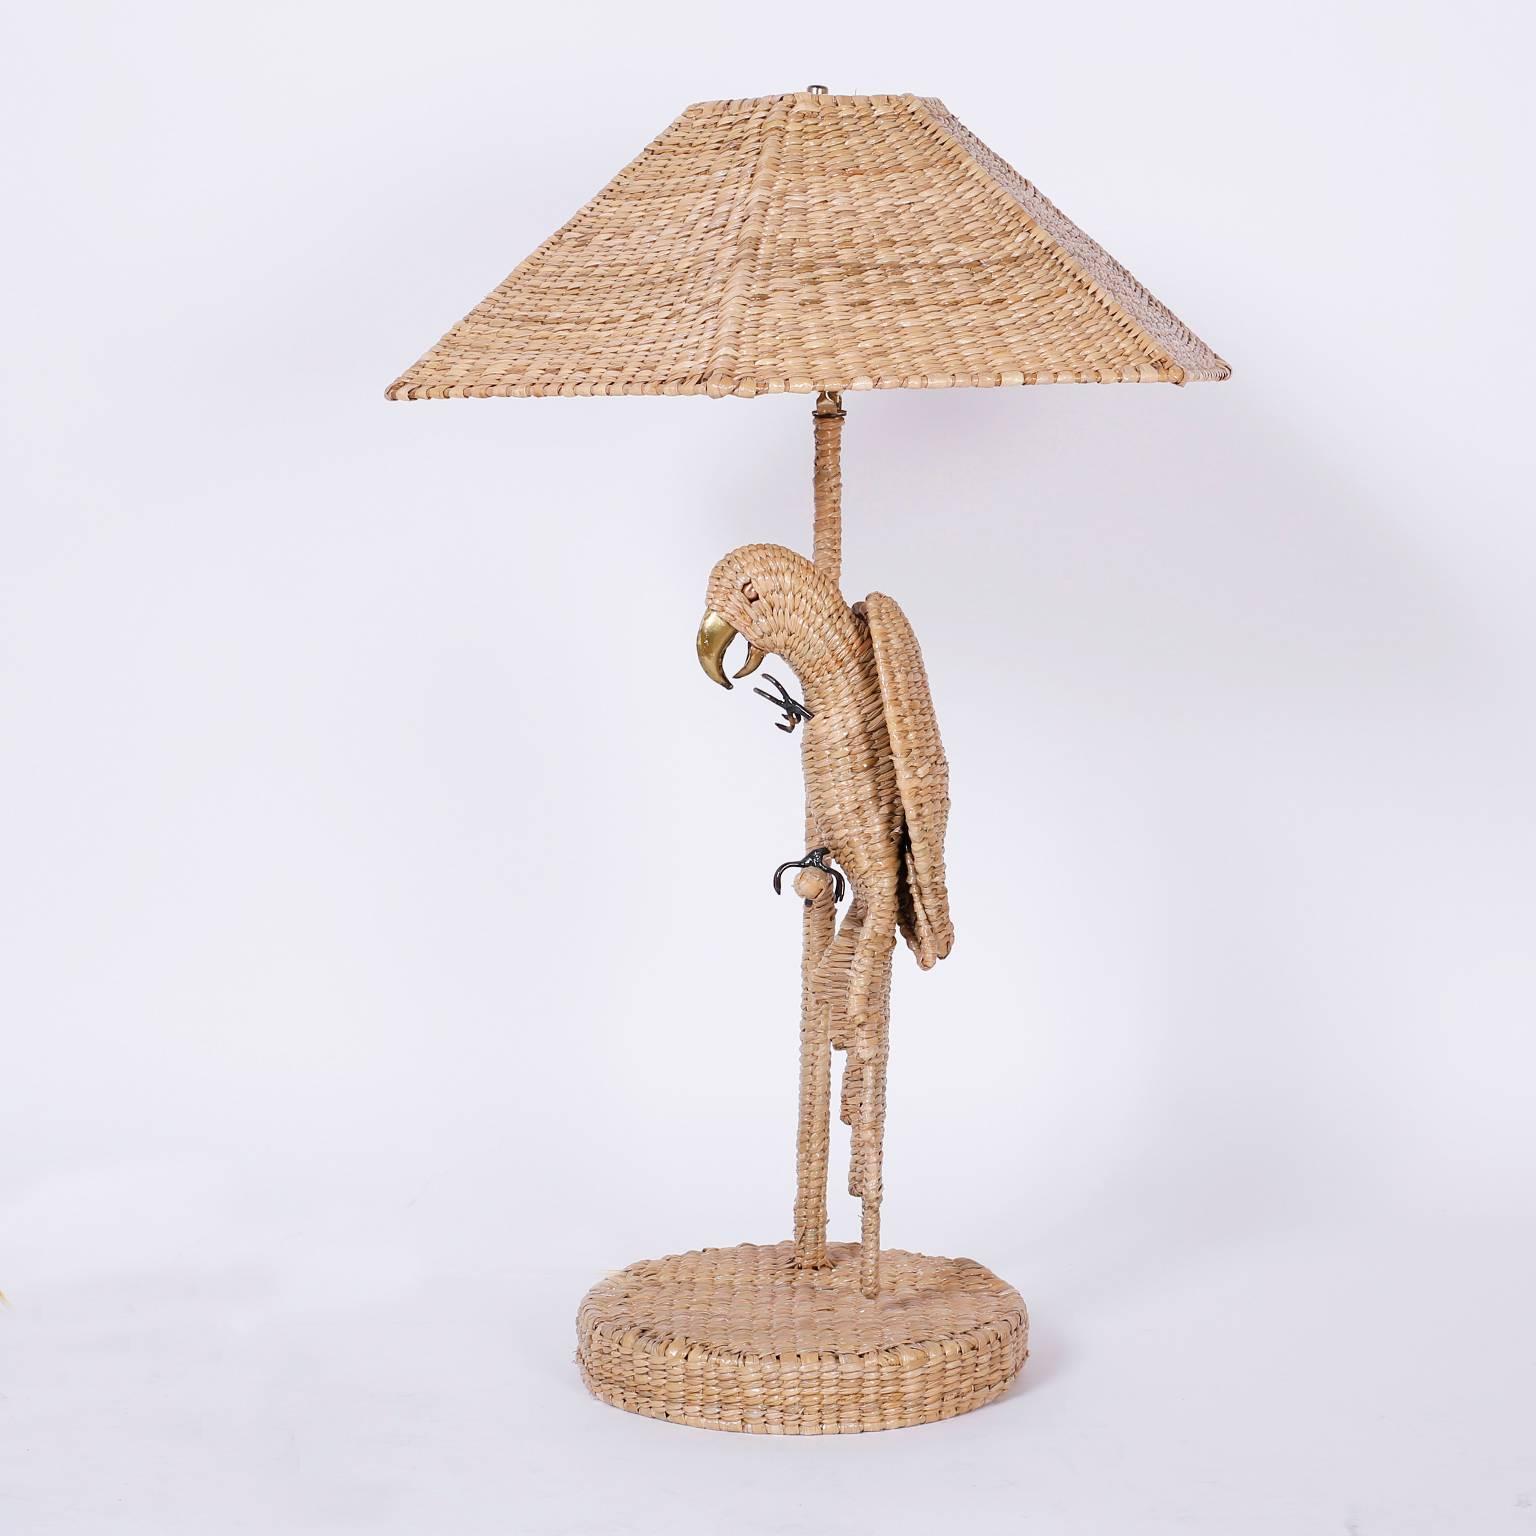 Mexican Pair of Mario Torres Wicker Parrot Table Lamps with Wicker or Linen Shades